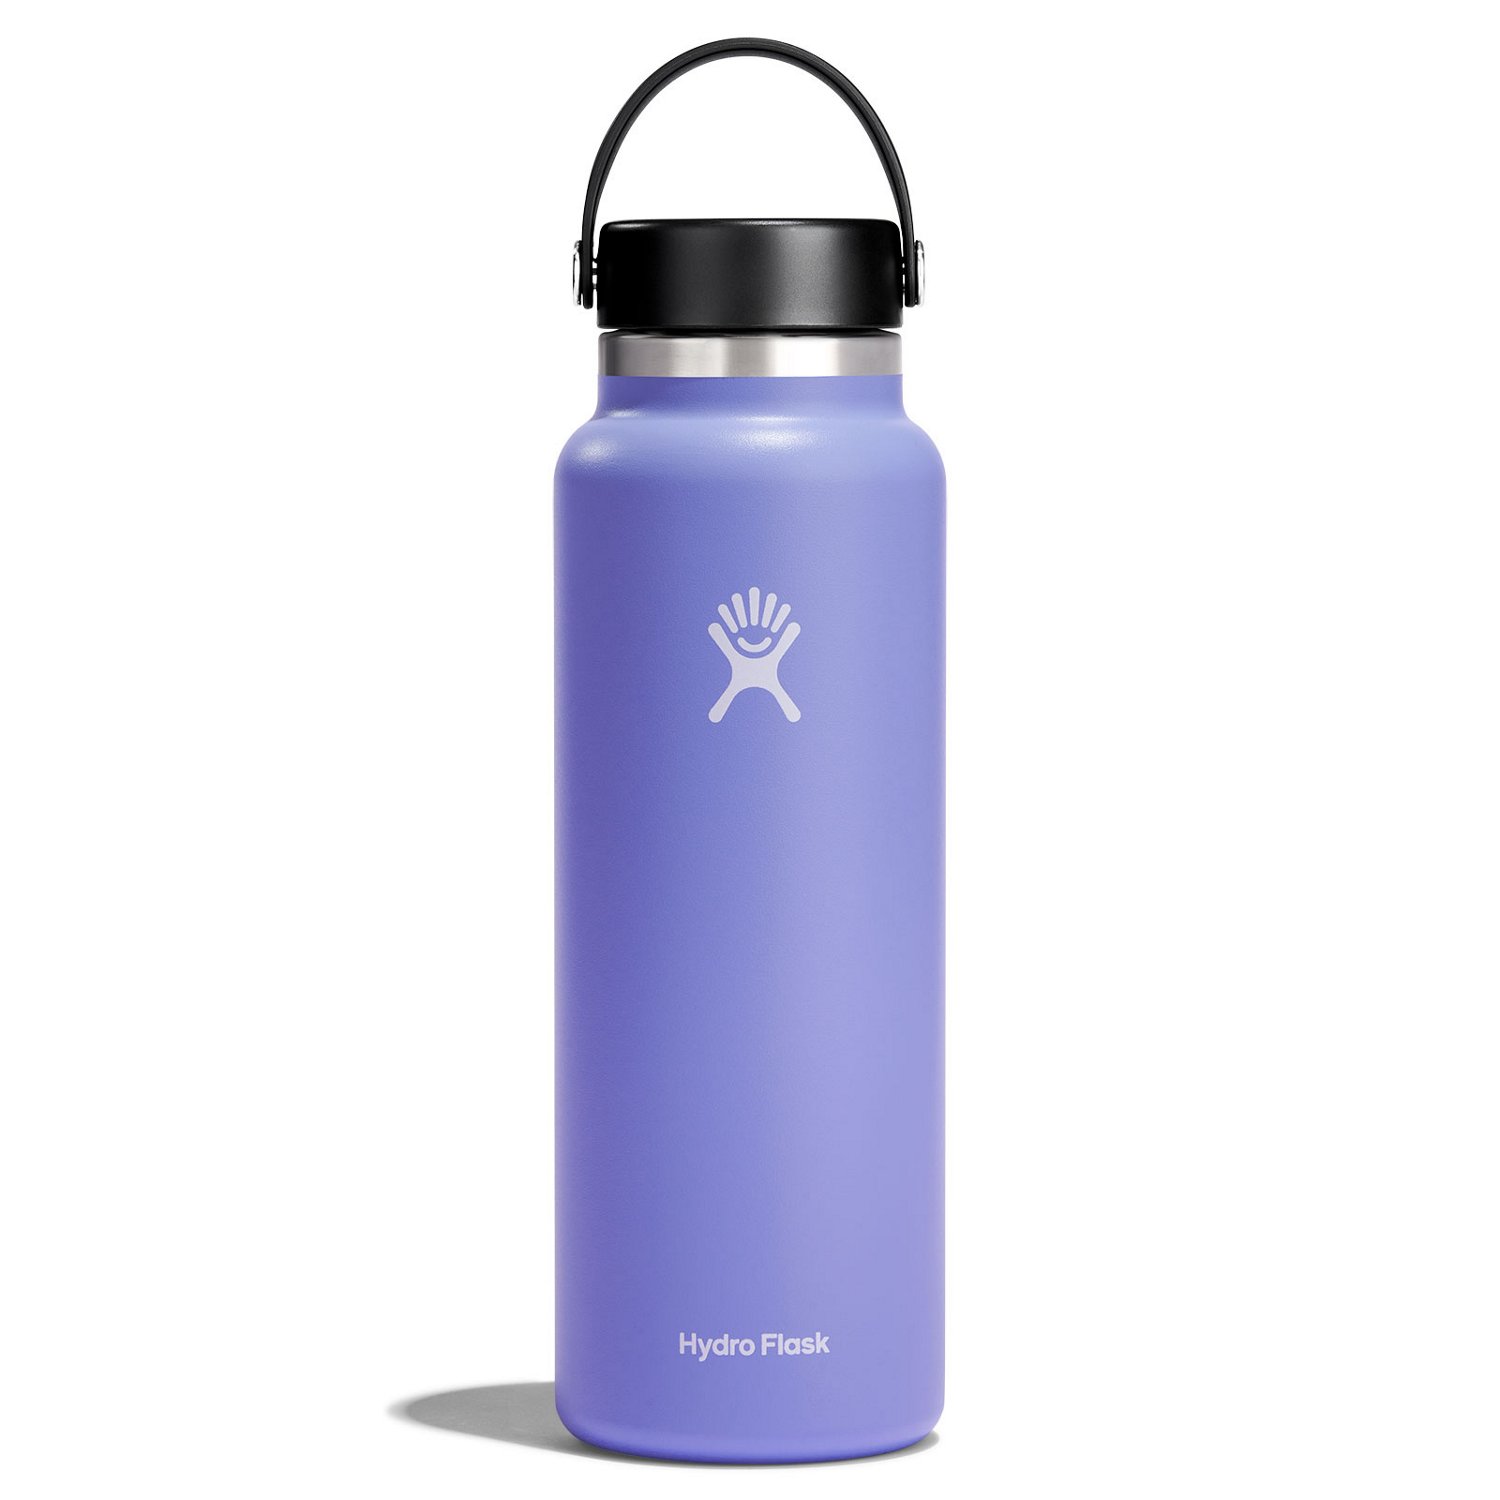 https://academy.scene7.com/is/image/academy///camping/drinkware/purple_hydro-flask-wide-mouth-2.0-40-oz-bottle-with-flex-cap_w40bts474/d0467c26f0664d26b0c9789cf9bdb325?$pdp-gallery-ng$